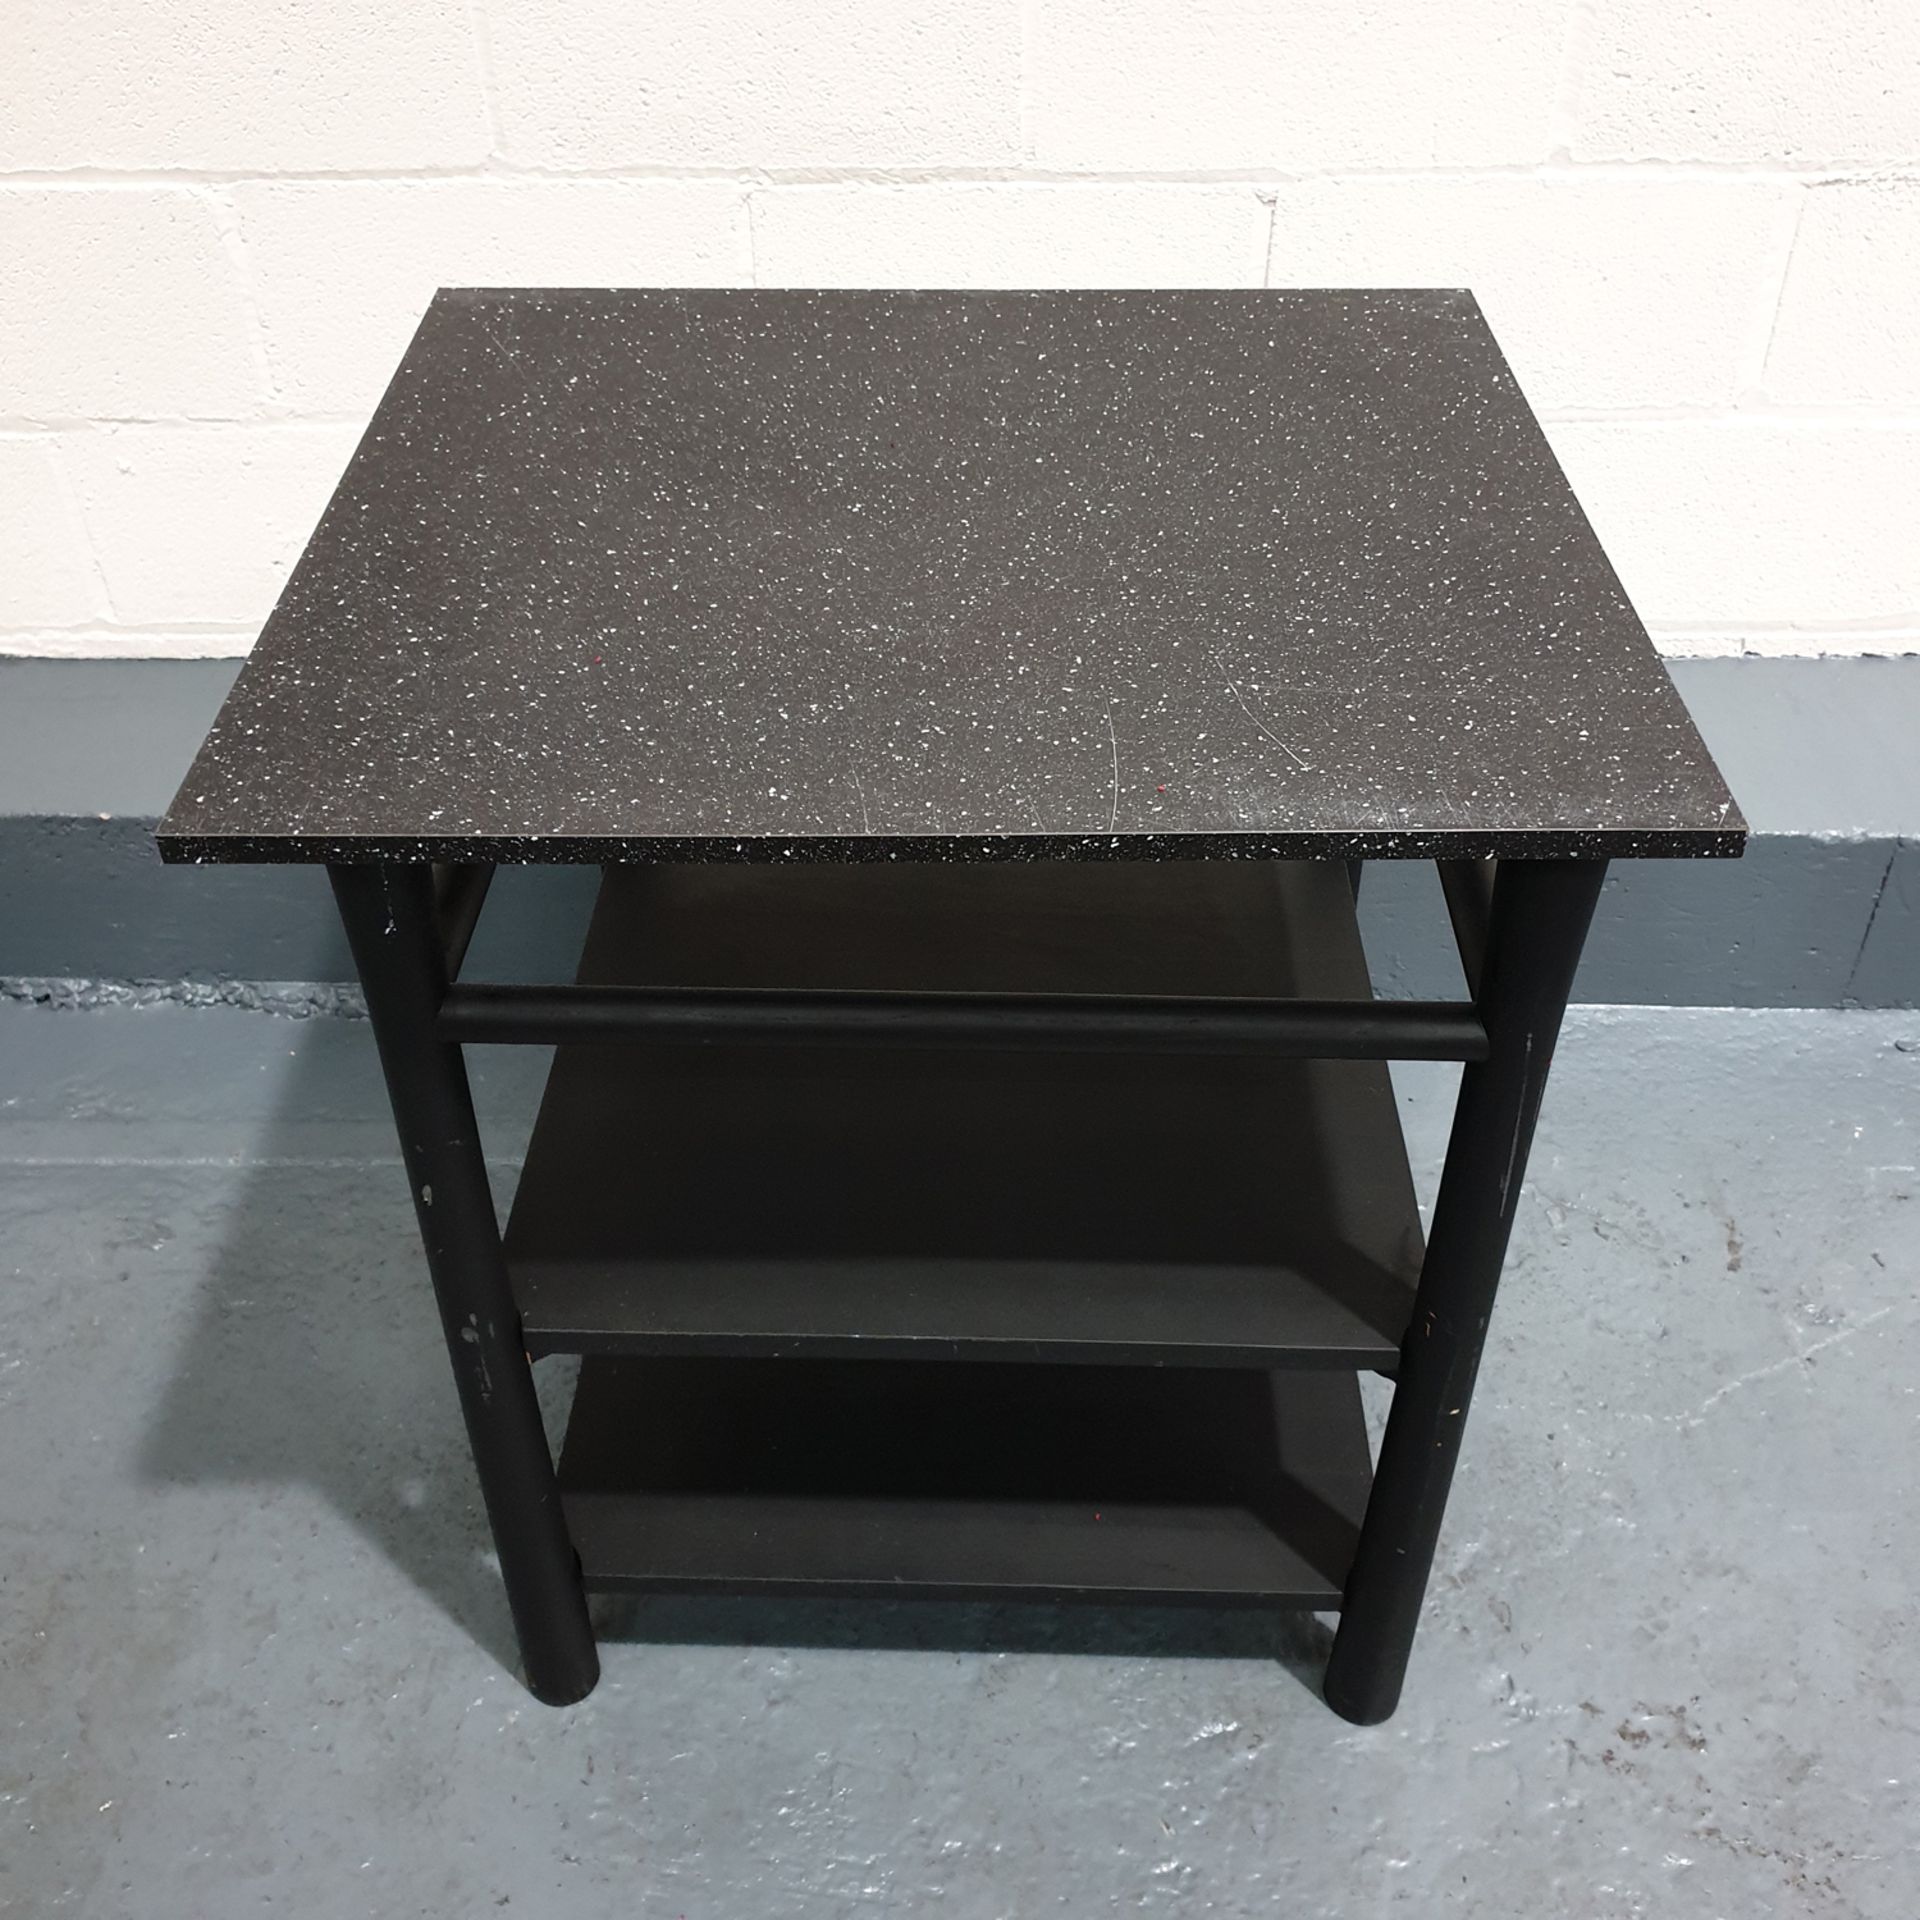 Marble Effect 3 Tier Table. Approx Dimensions 680mm x 600mm x 760mm High.